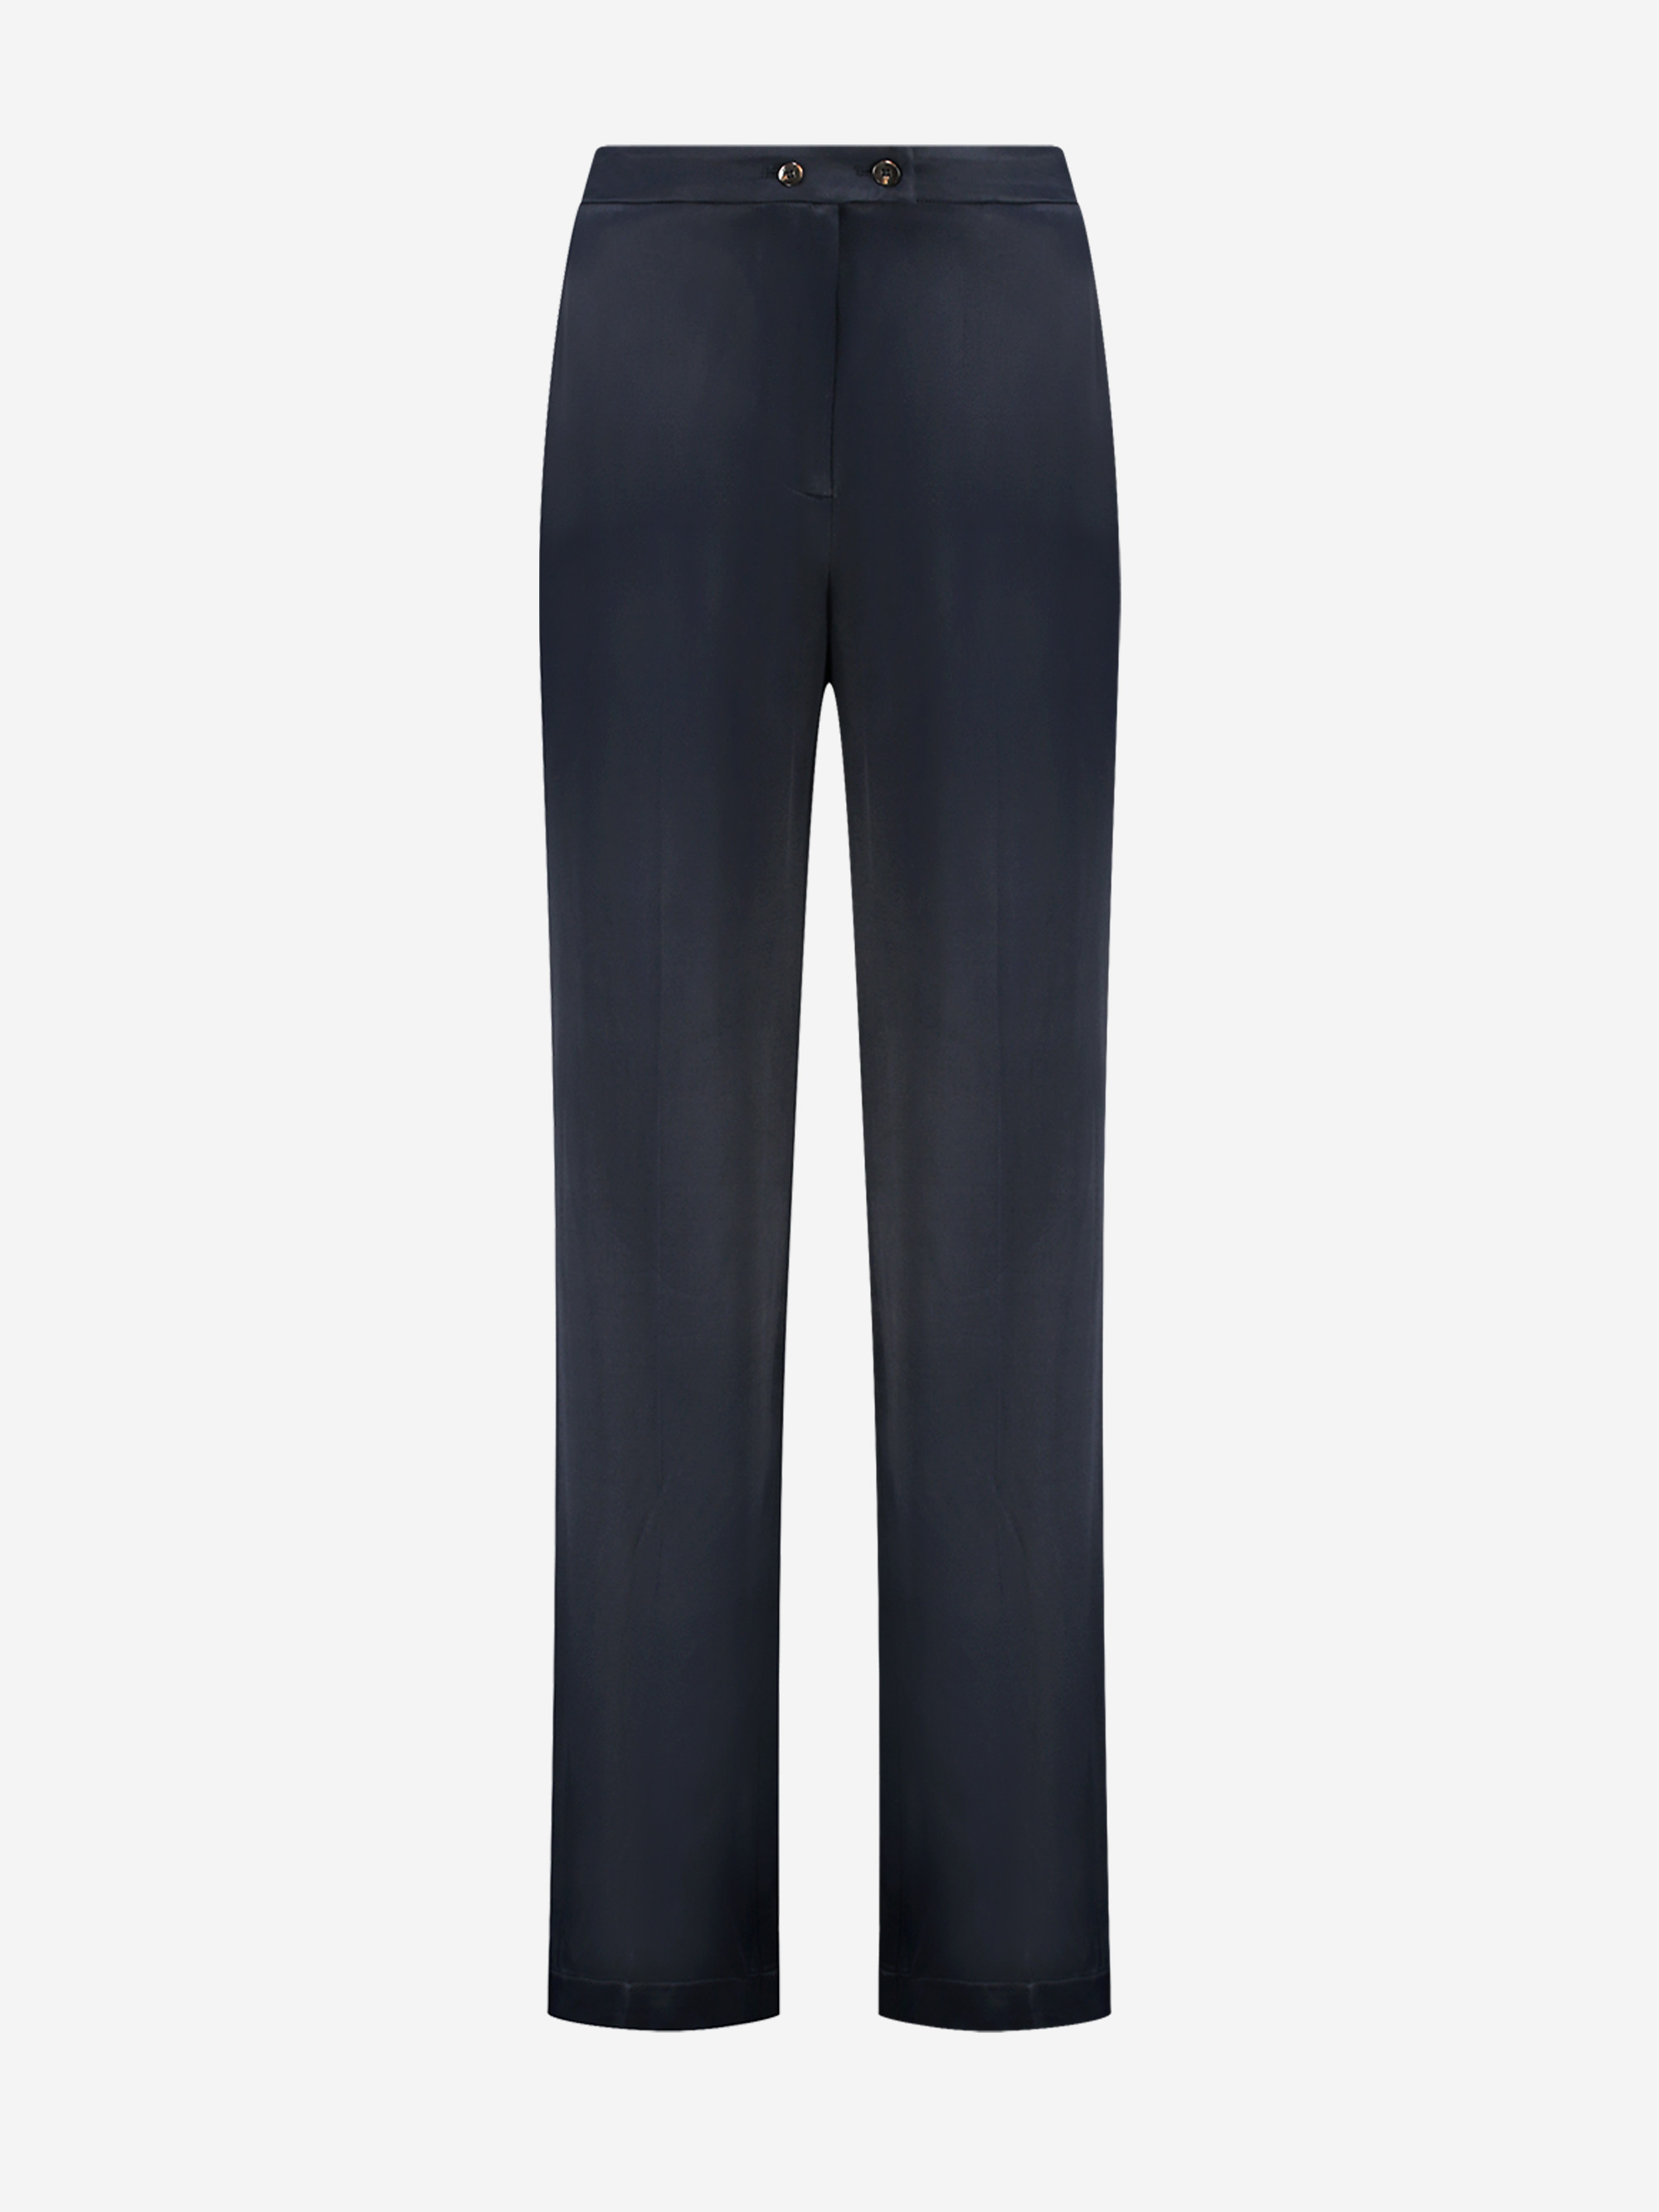 Straight satin look trousers with high rise